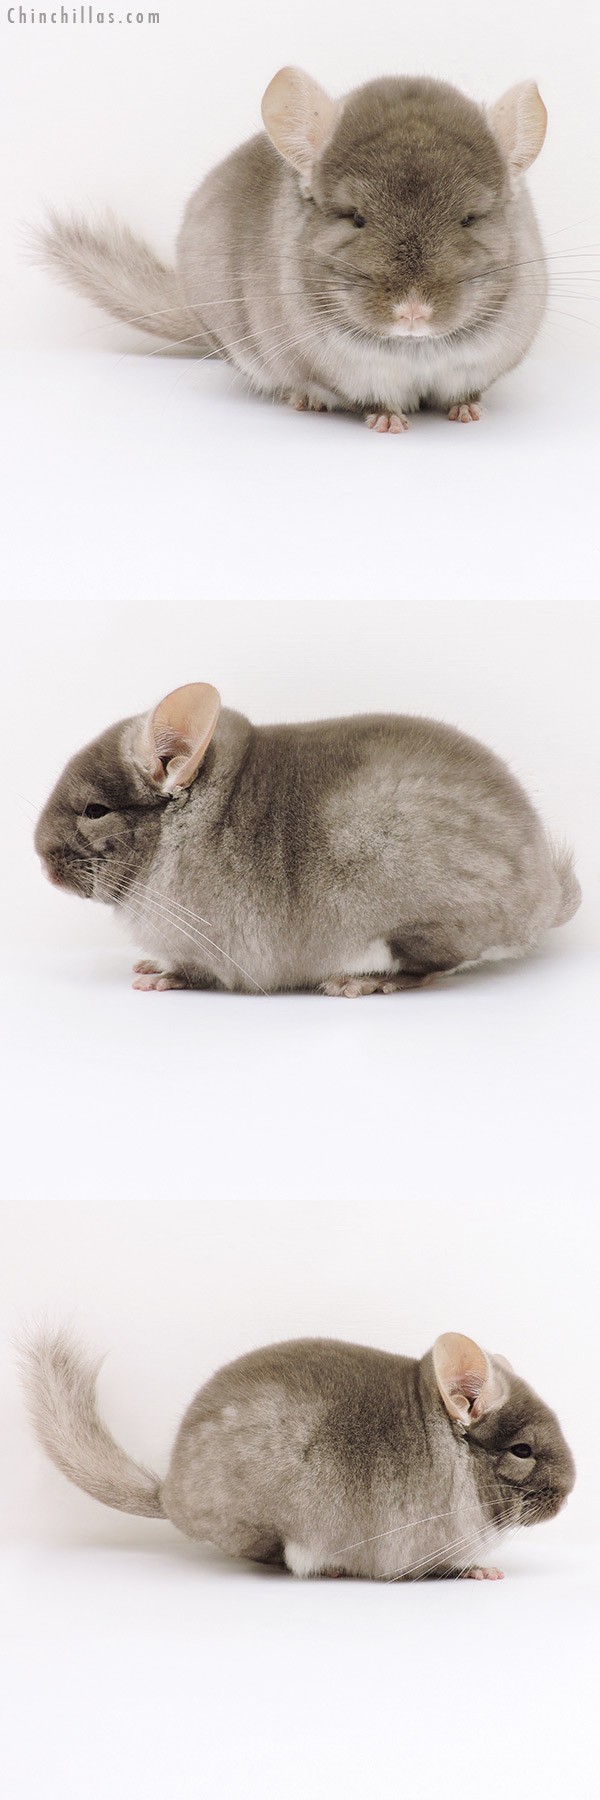 Chinchilla or related item offered for sale or export on Chinchillas.com - 16308 Show Quality Brevi Type TOV Beige / Brown Velvet Male Chinchilla